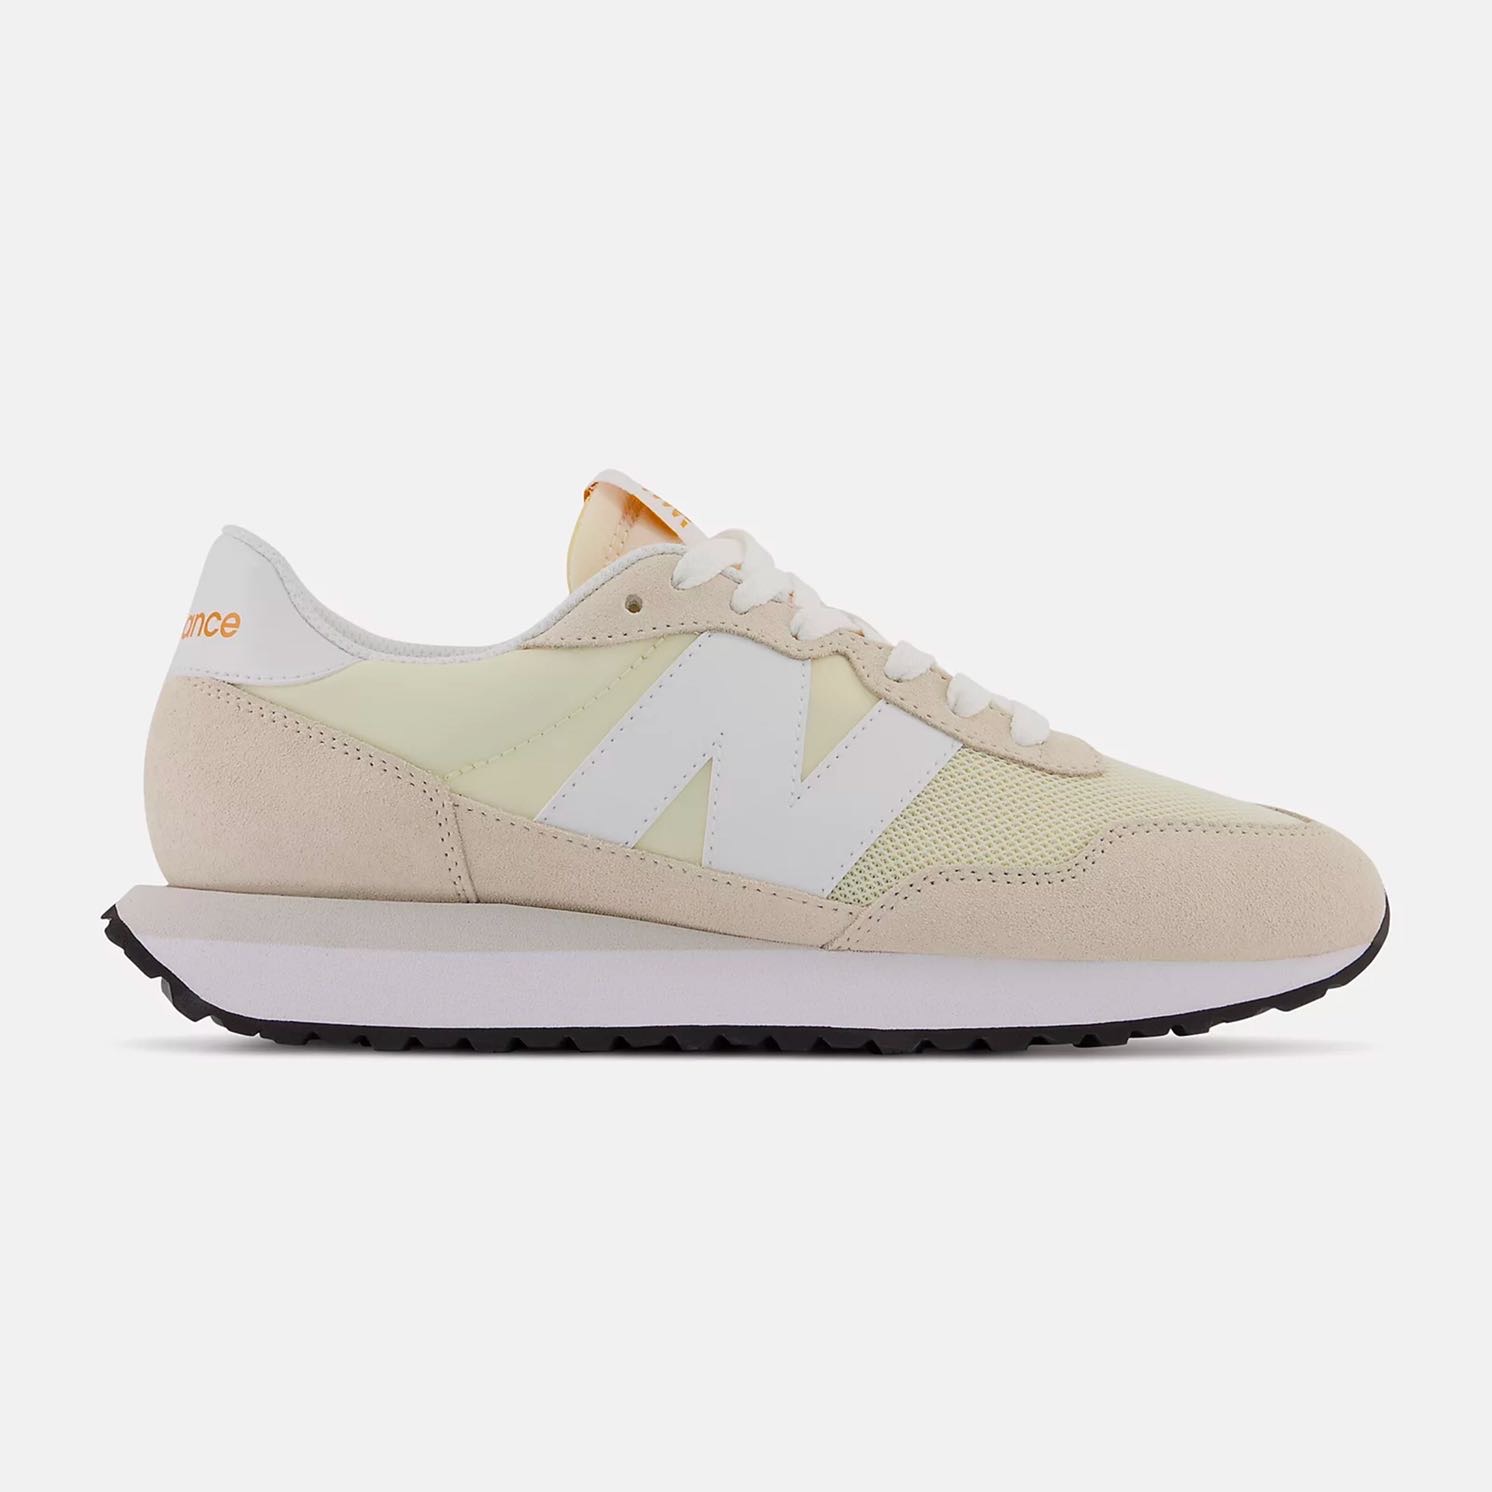 New Balance 237 Calm taupe with white